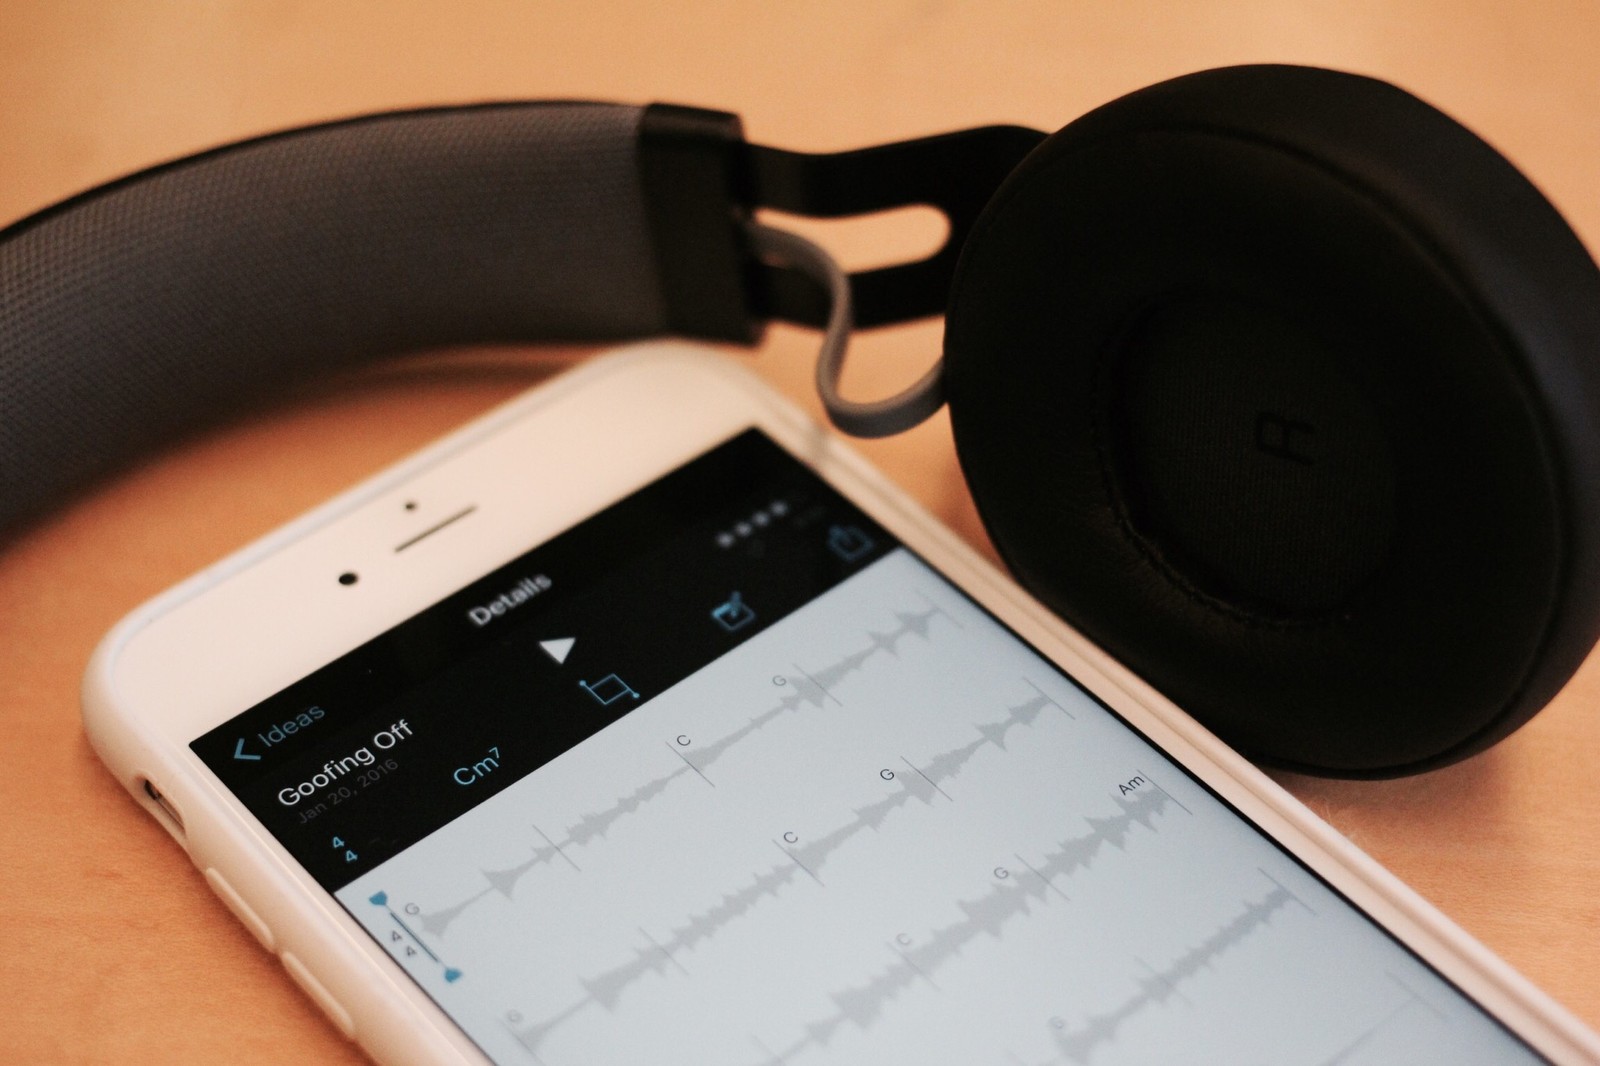 How To Send Garageband Files From Iphone To Mac